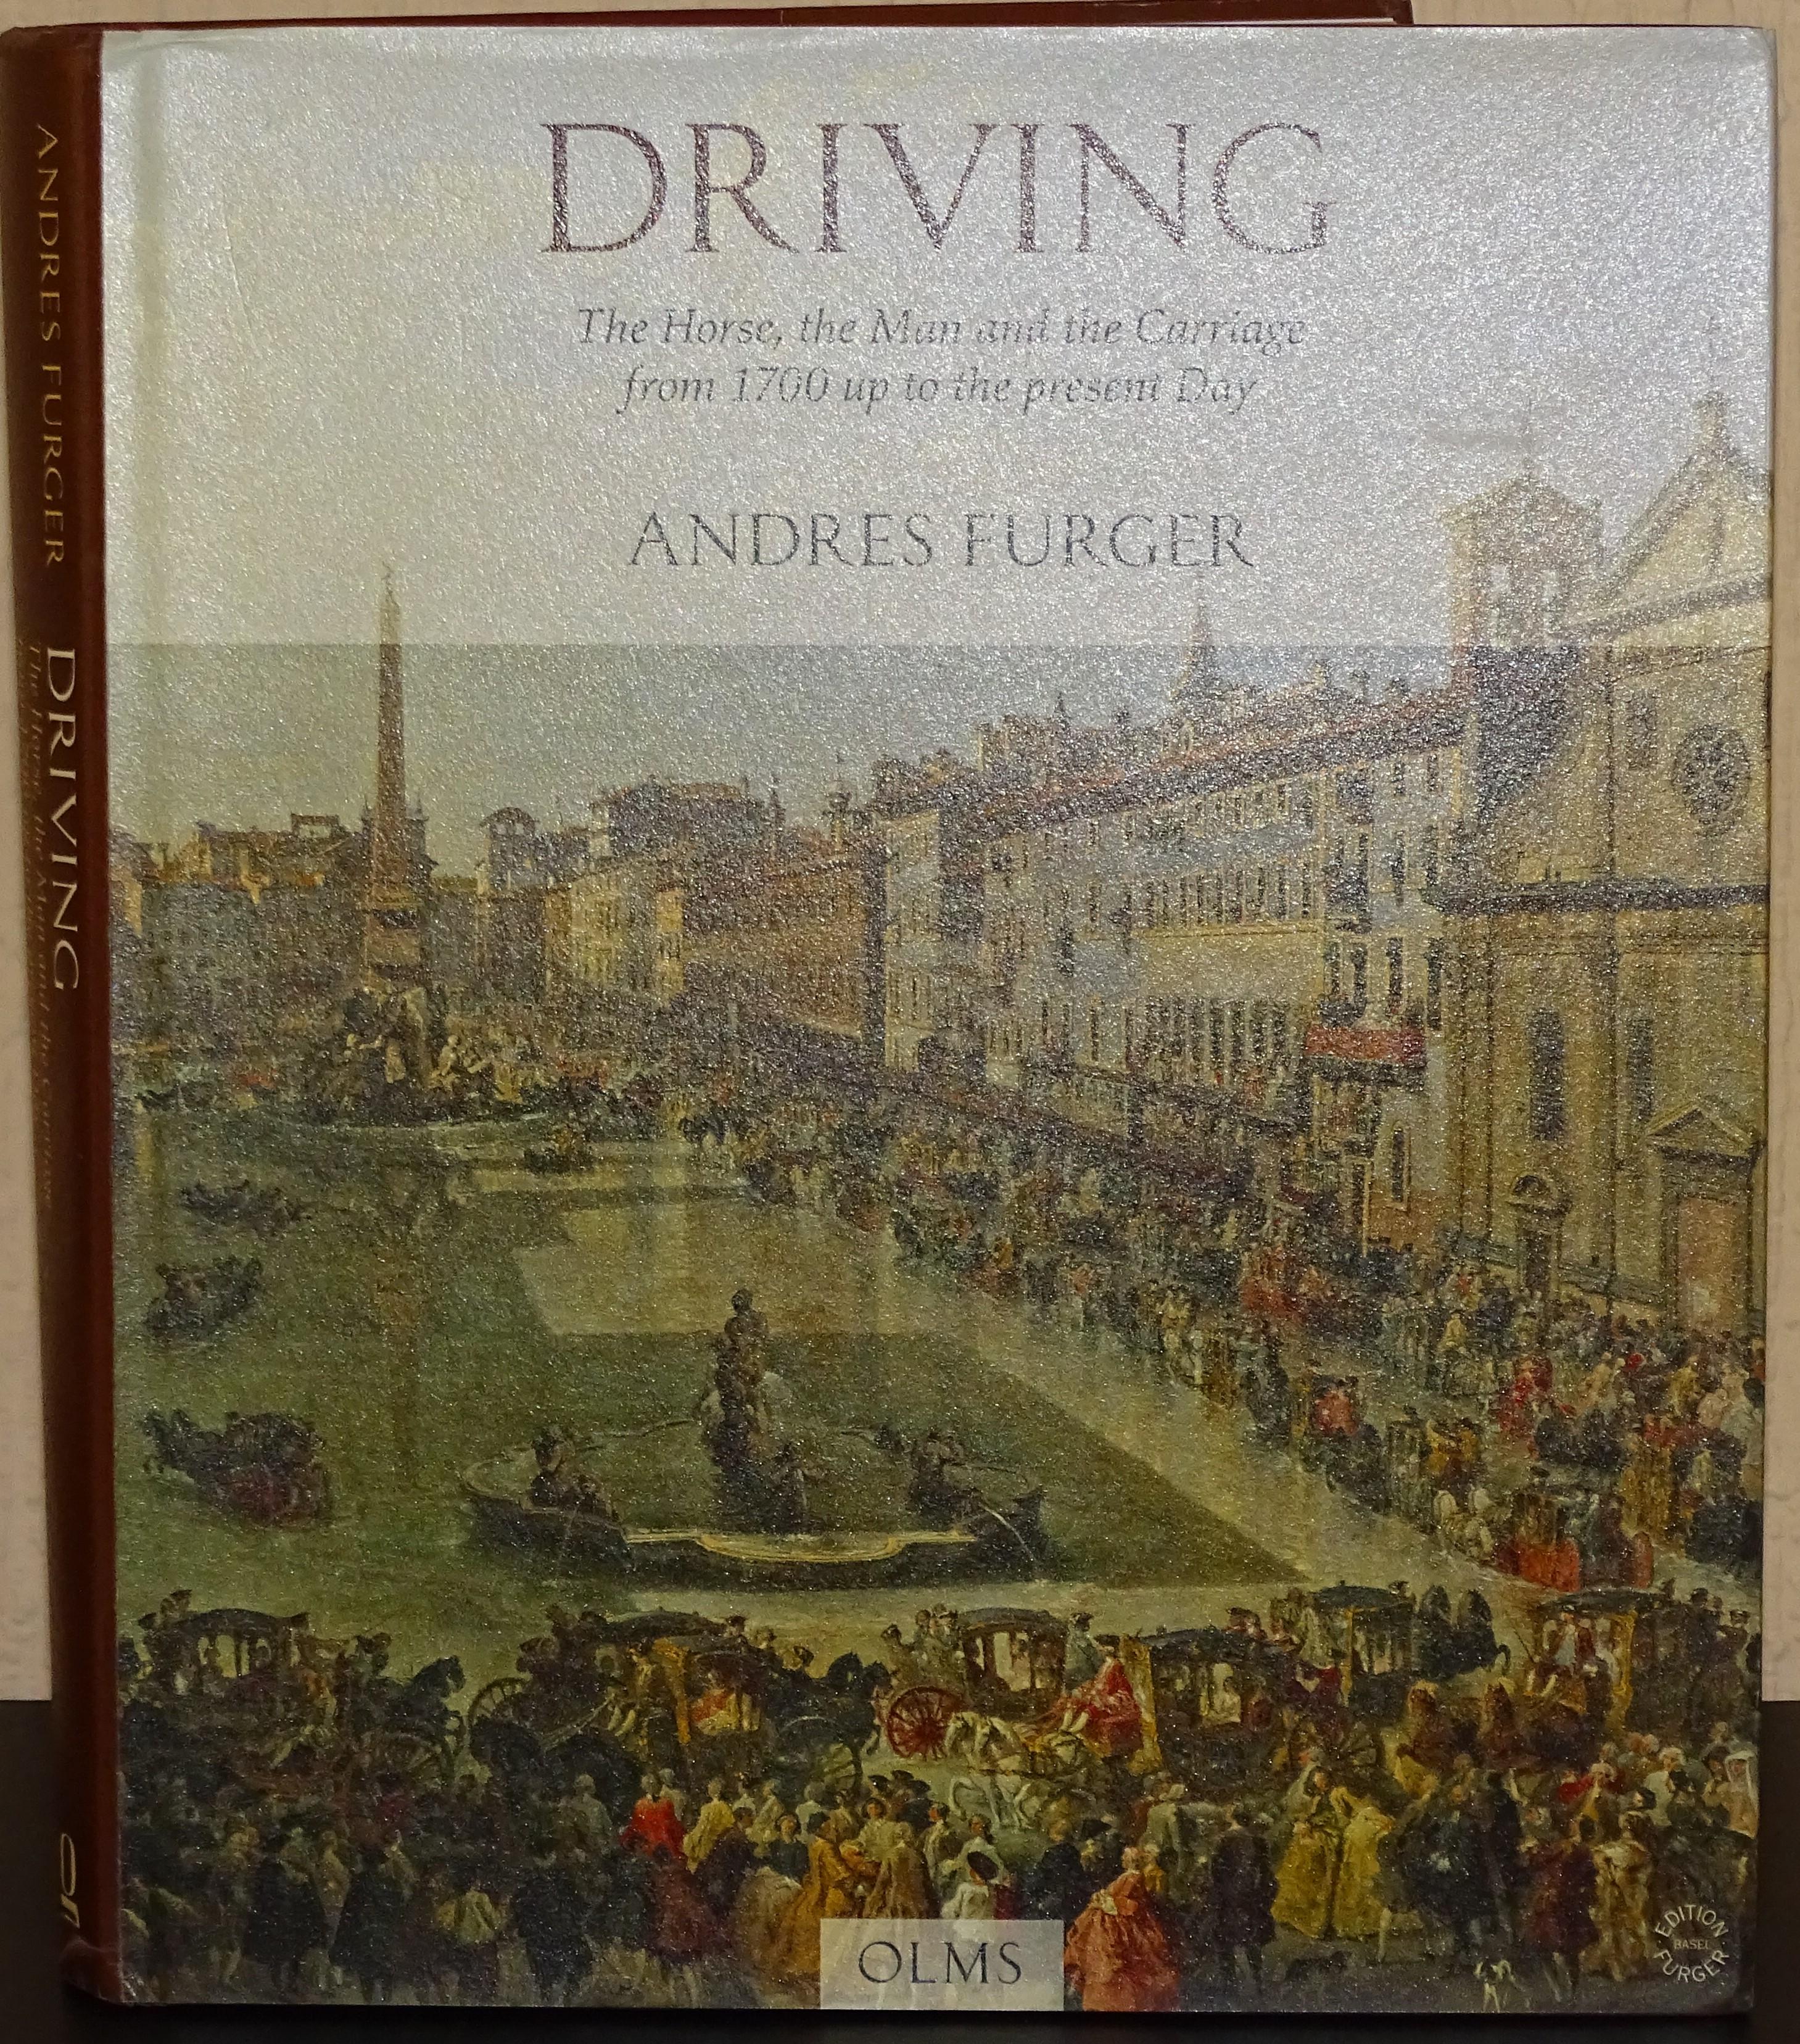 Driving: The Horse, the Man and the Carriage from 1700 Up to the Present Day - Andres Furger